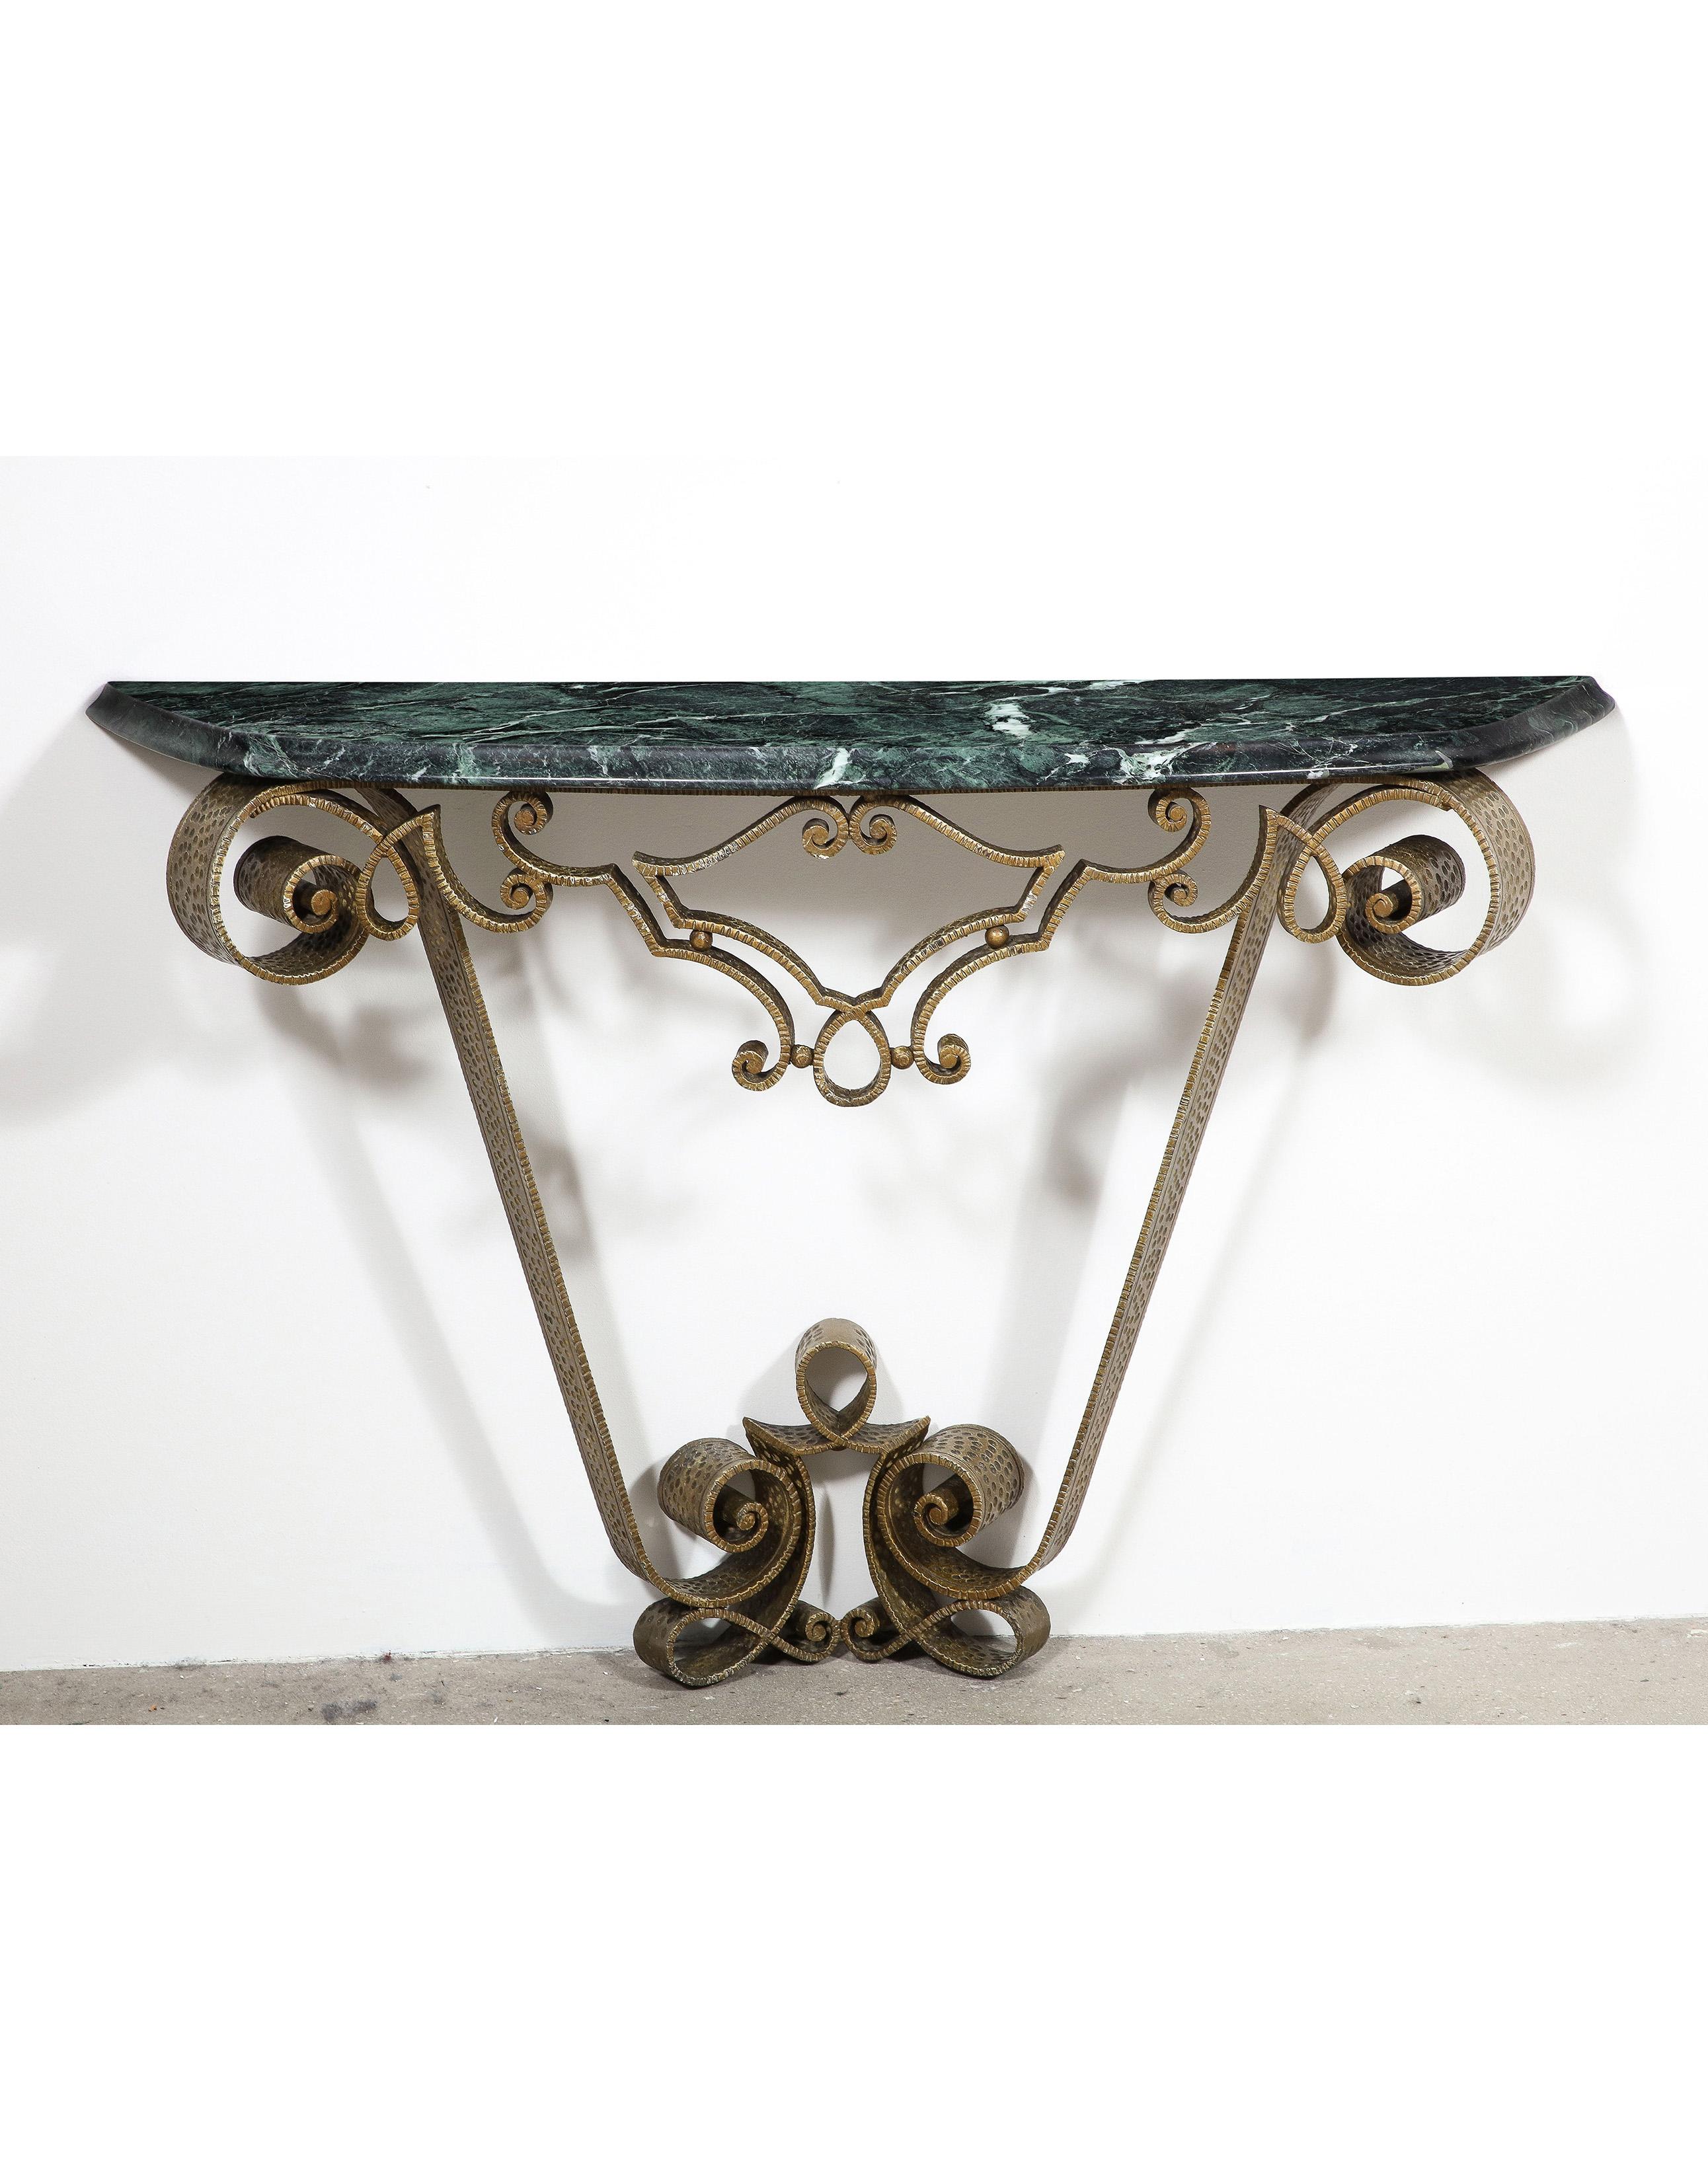 Attributed to Raymond Sube this superbly executed wall mounted scrolling iron console with hammered detailing has an original polychromed finish, the whole supporting a marble top.